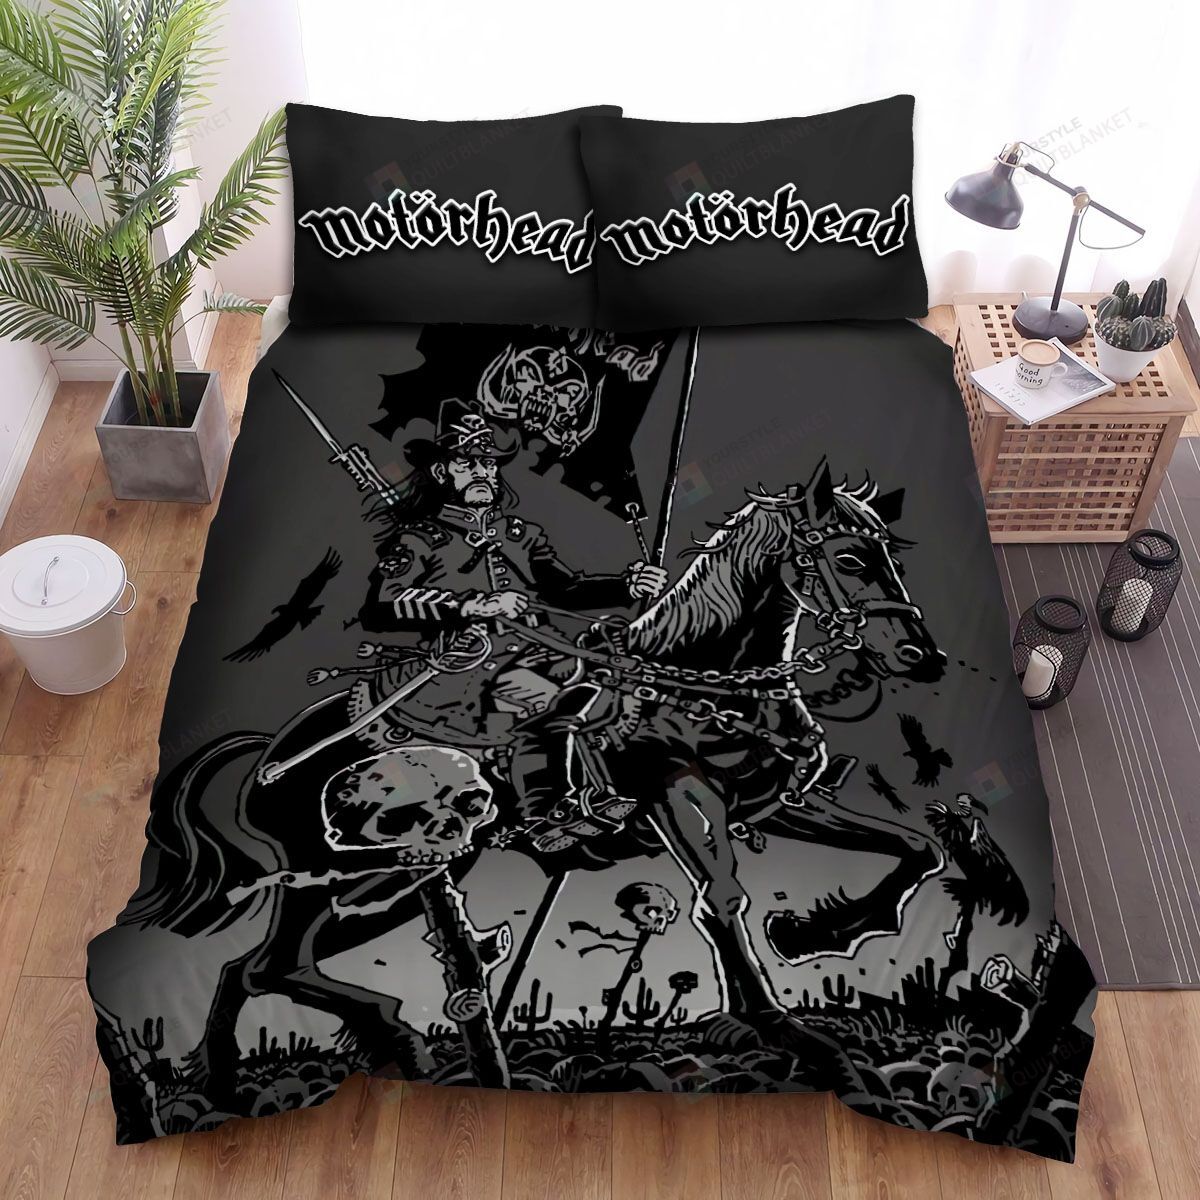 March Or Die Motorhead Bed Sheets Spread Comforter Duvet Cover Bedding Sets